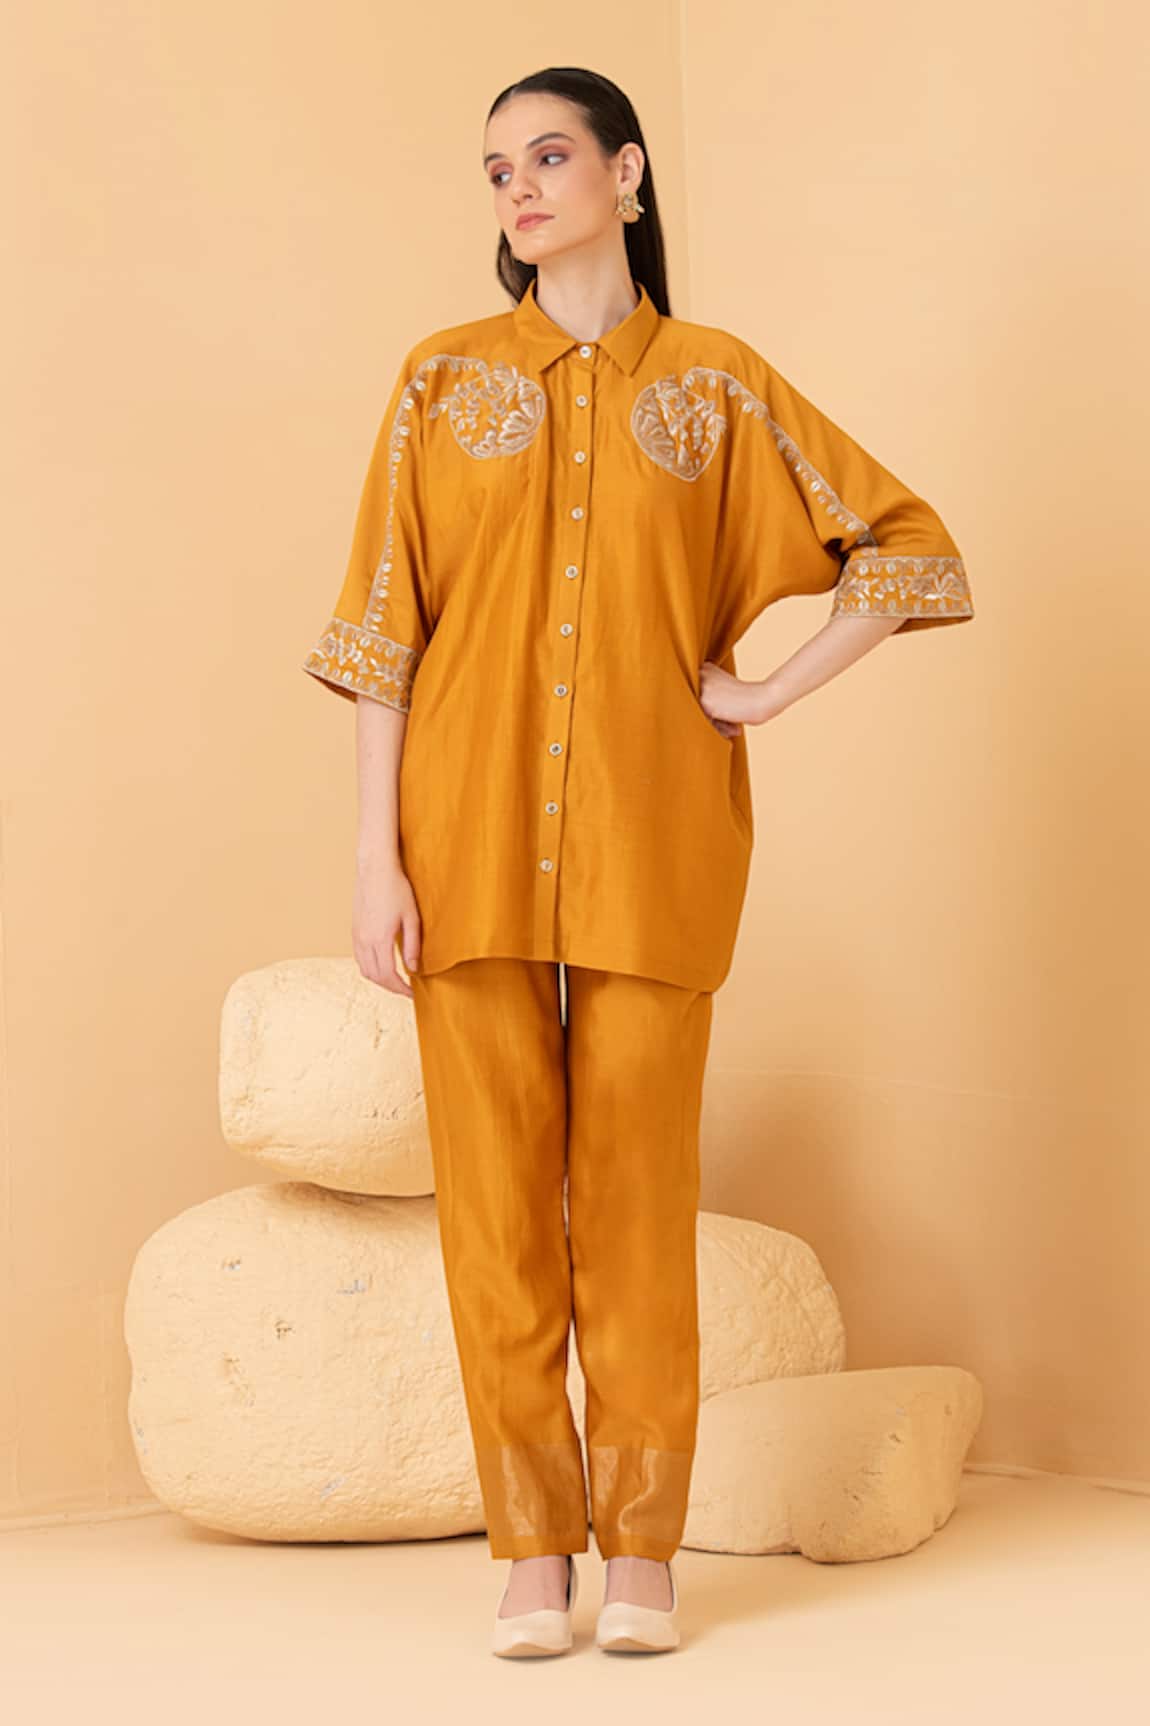 Divi by sonal khandelwal Chanderi Placement Embroidered Kaftan Top & Pant Set